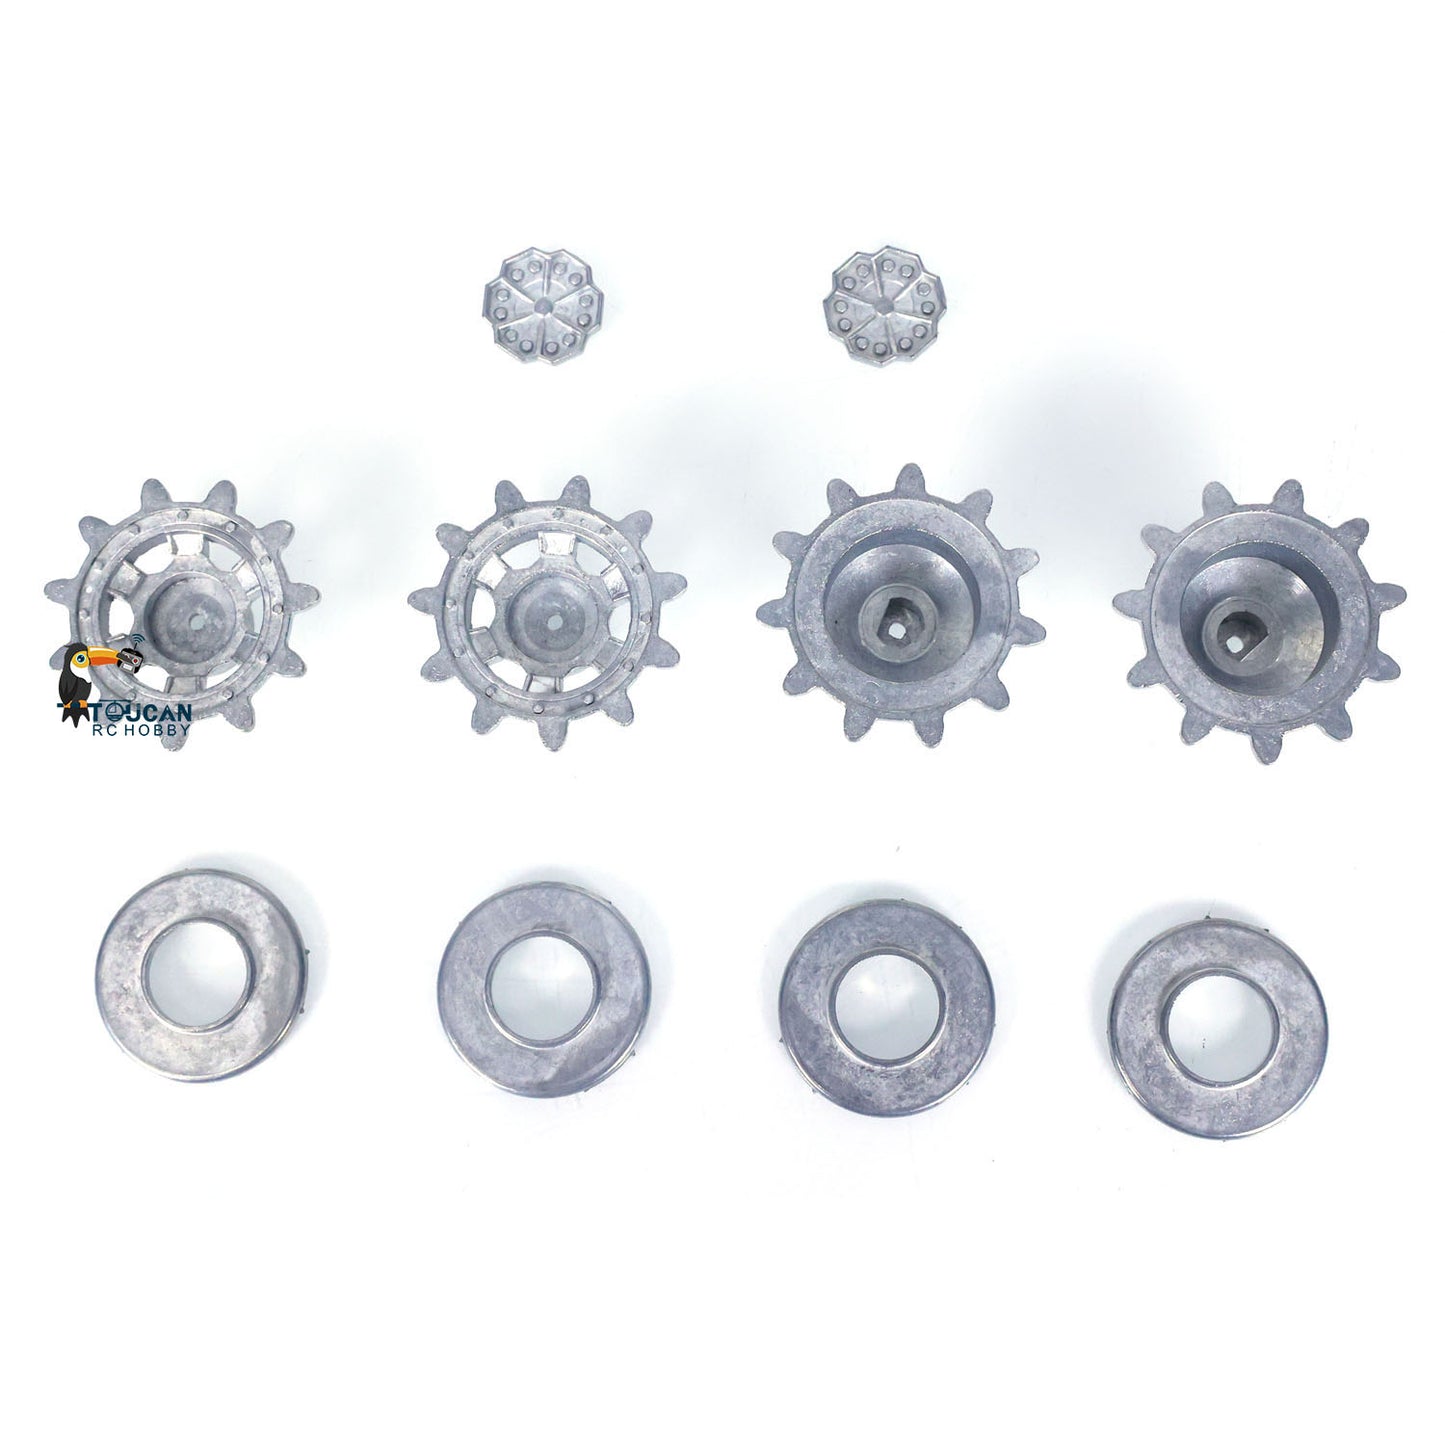 Metal Idler Road Wheels Sprockets Antenna for Heng Long 1/16 RC Tank Parts Leopard 2 A6 3889 Military Armored Cars Vehicles Toy